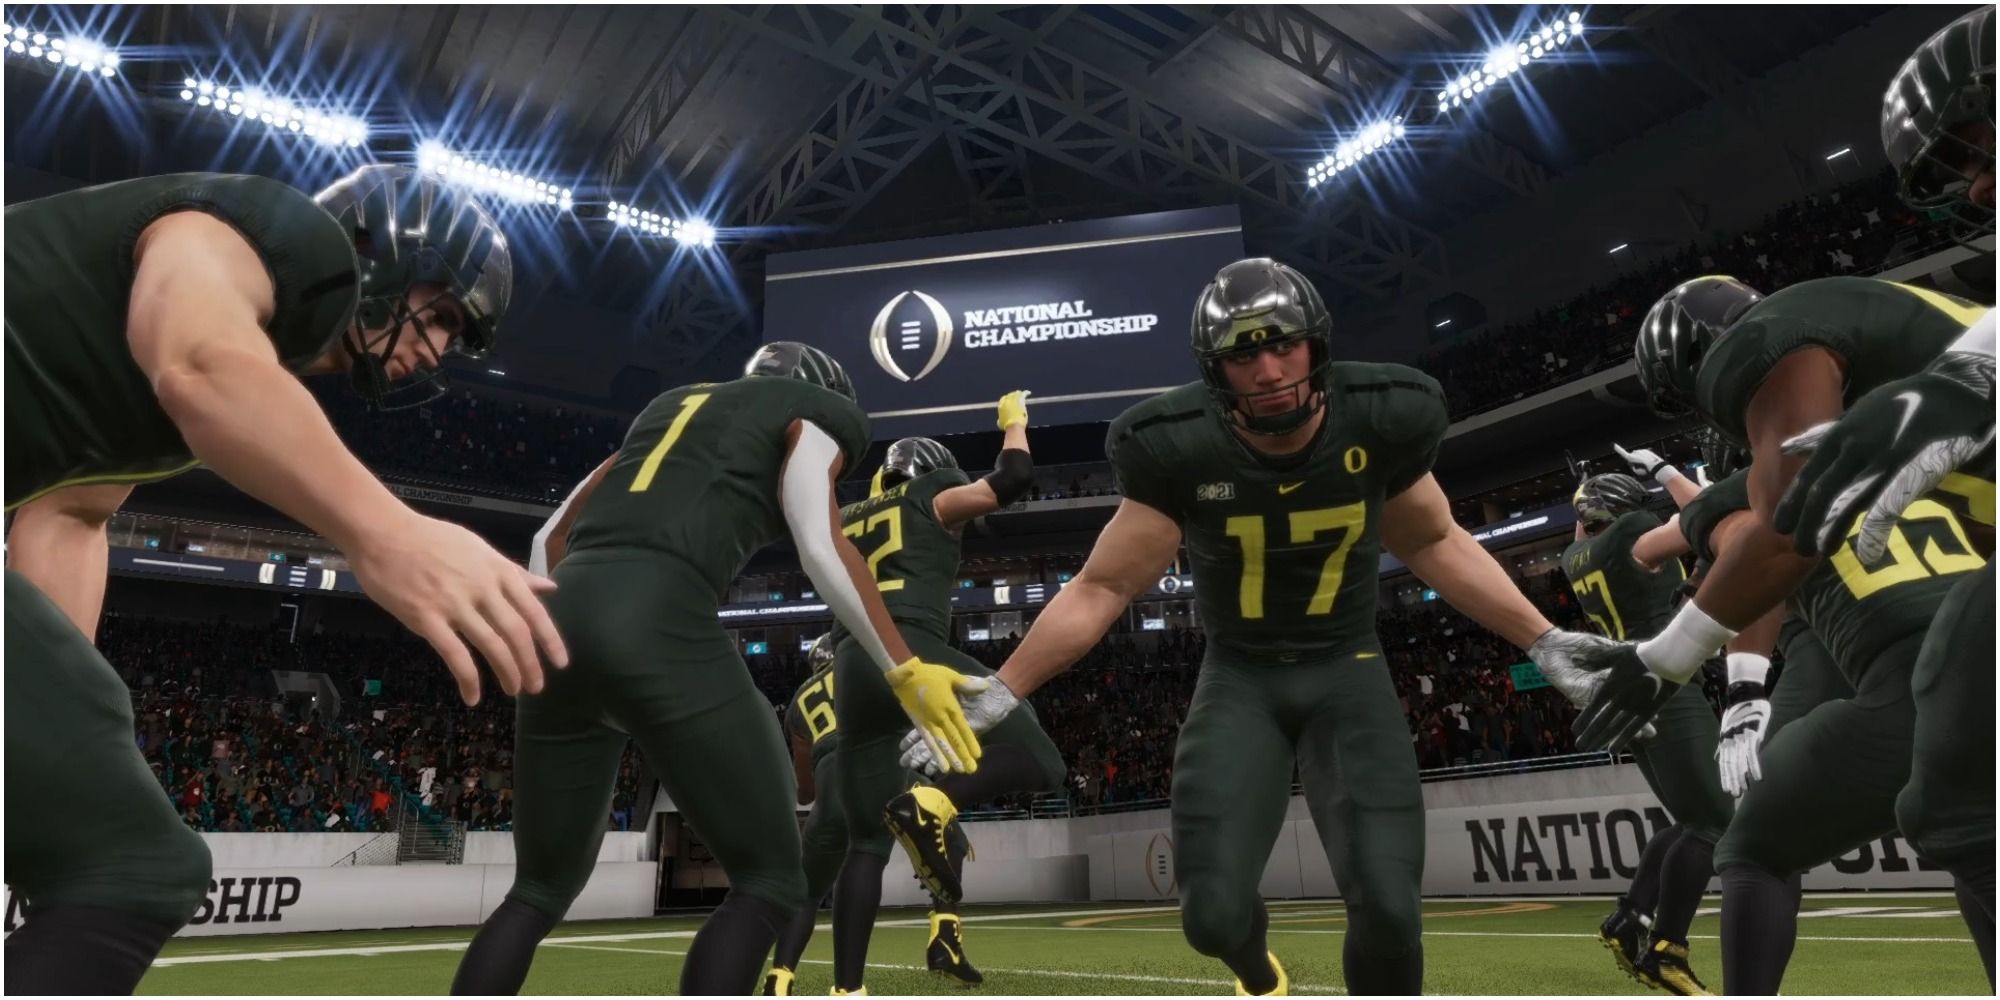 Madden NFL 22 Taking The Field For The College National Championship Game